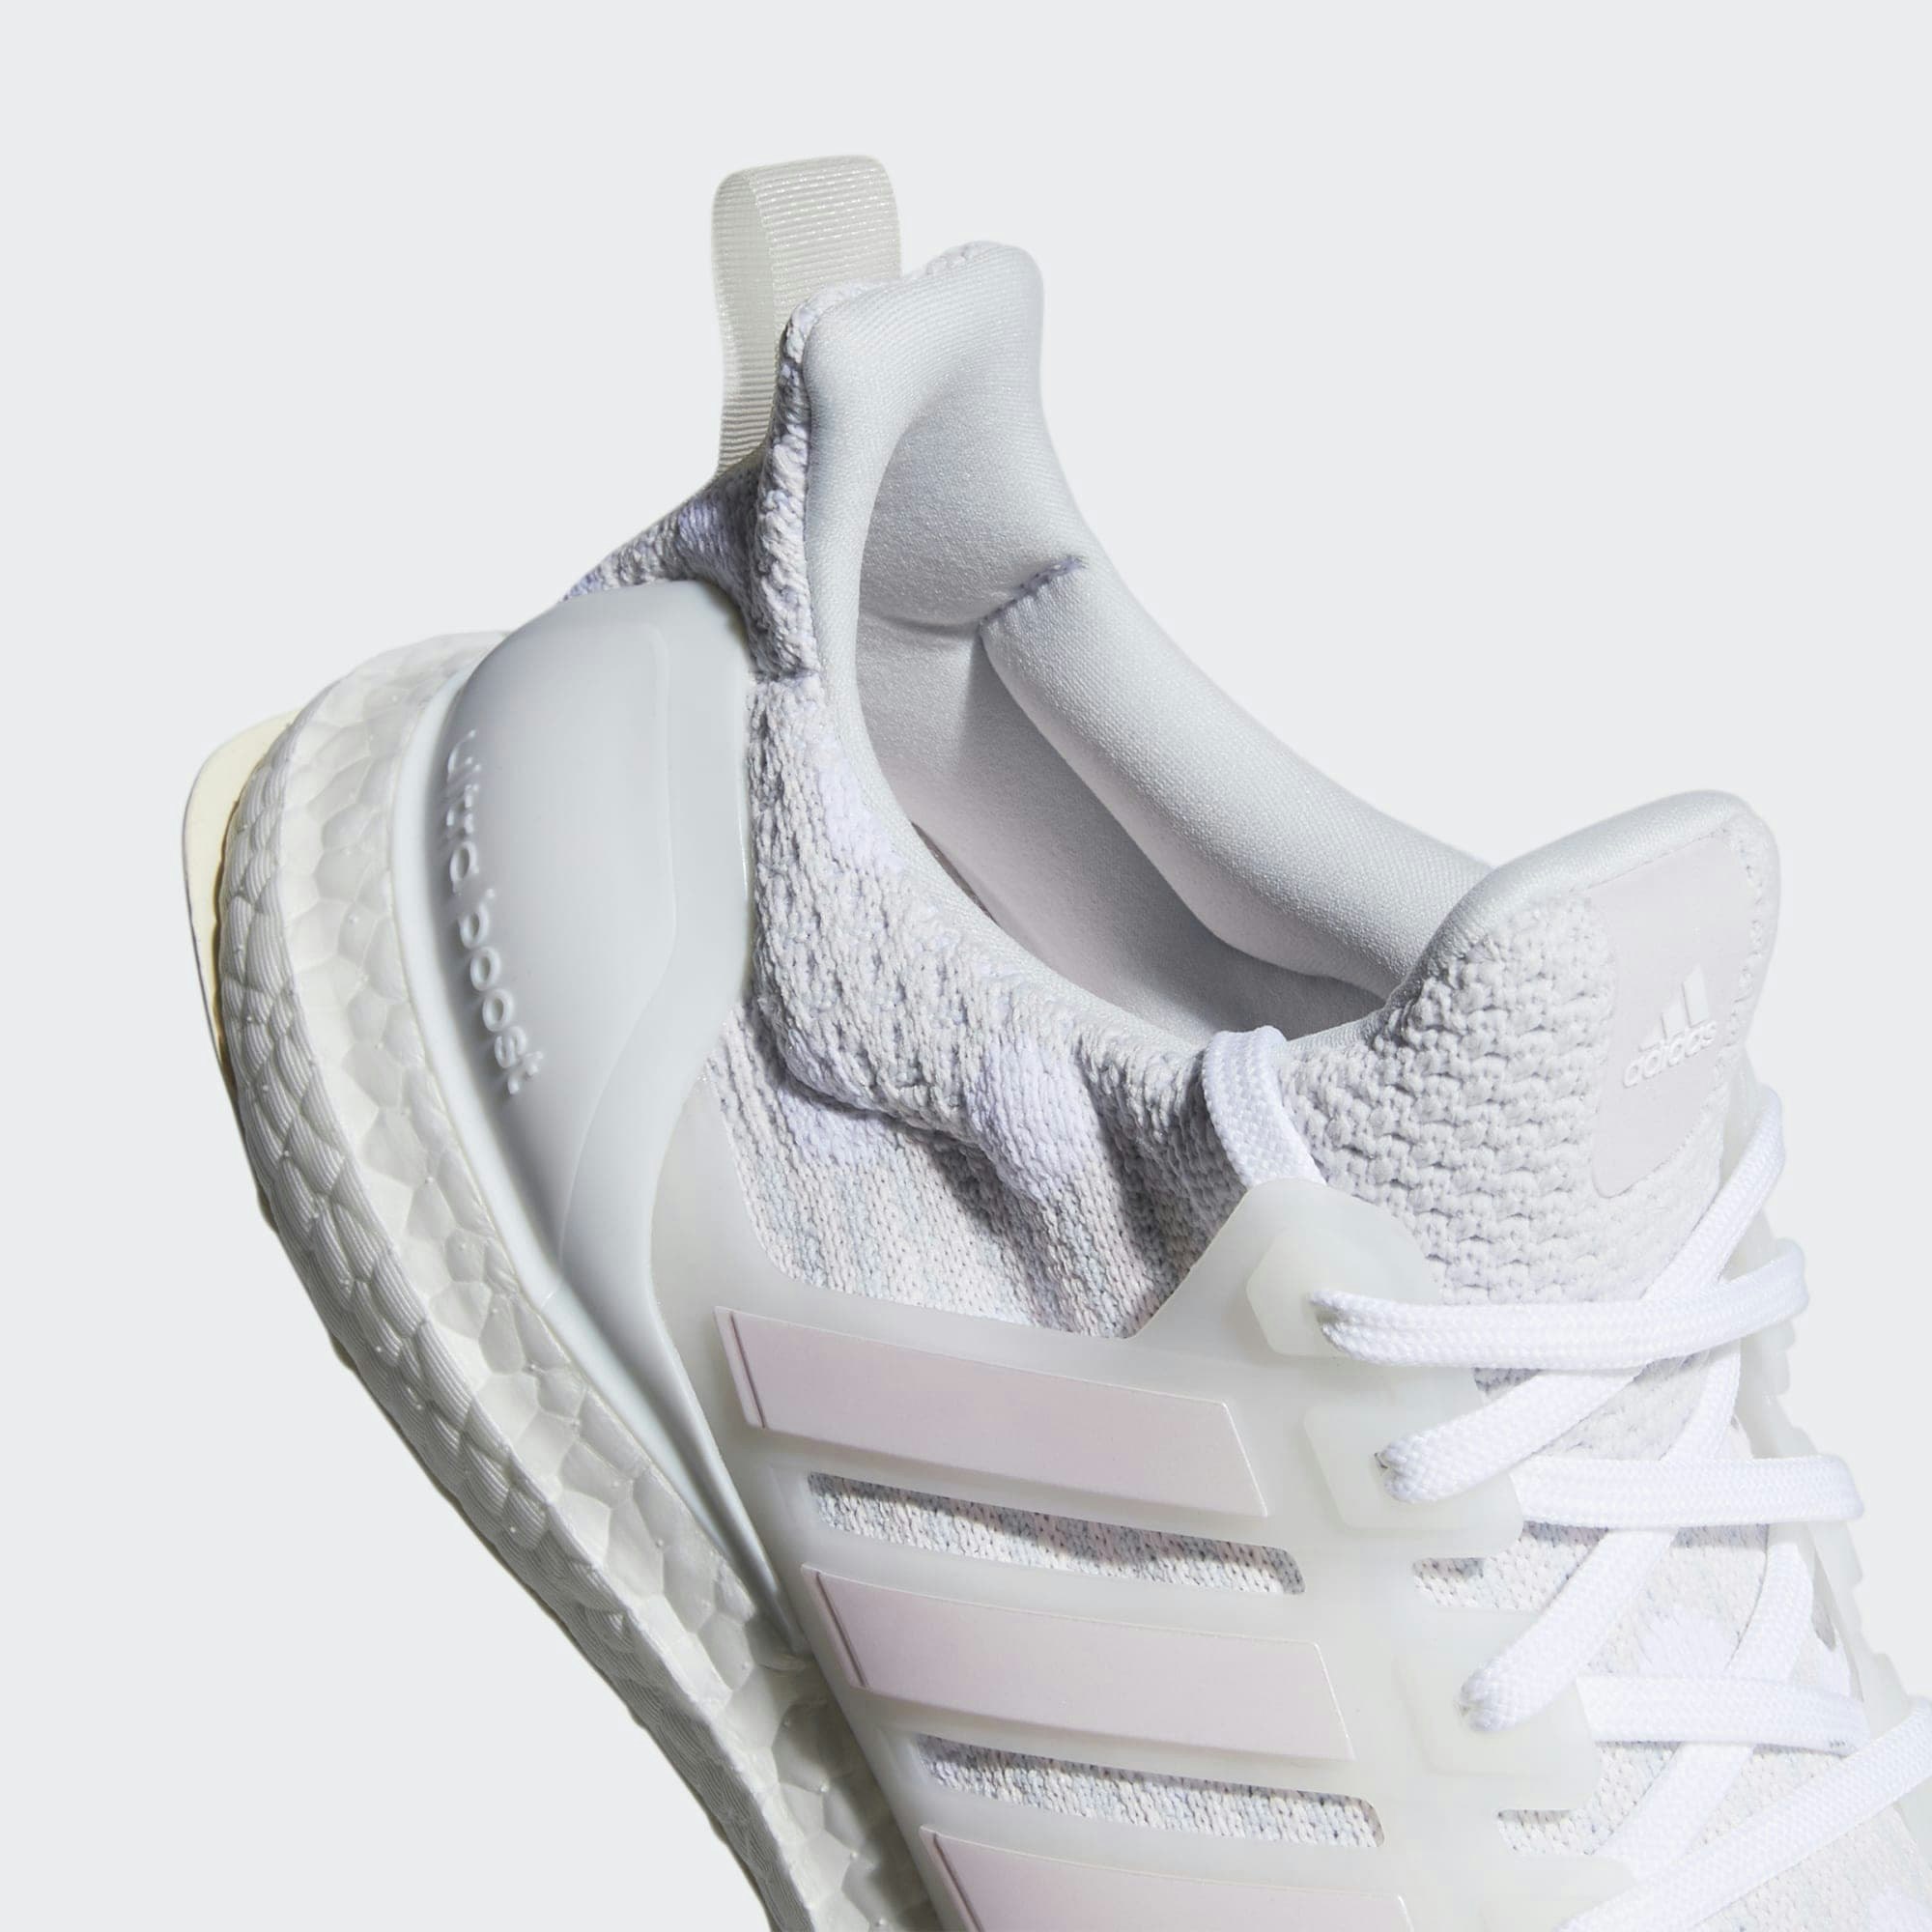 Parley x adidas Ultra Boost DNA "Cloud White"